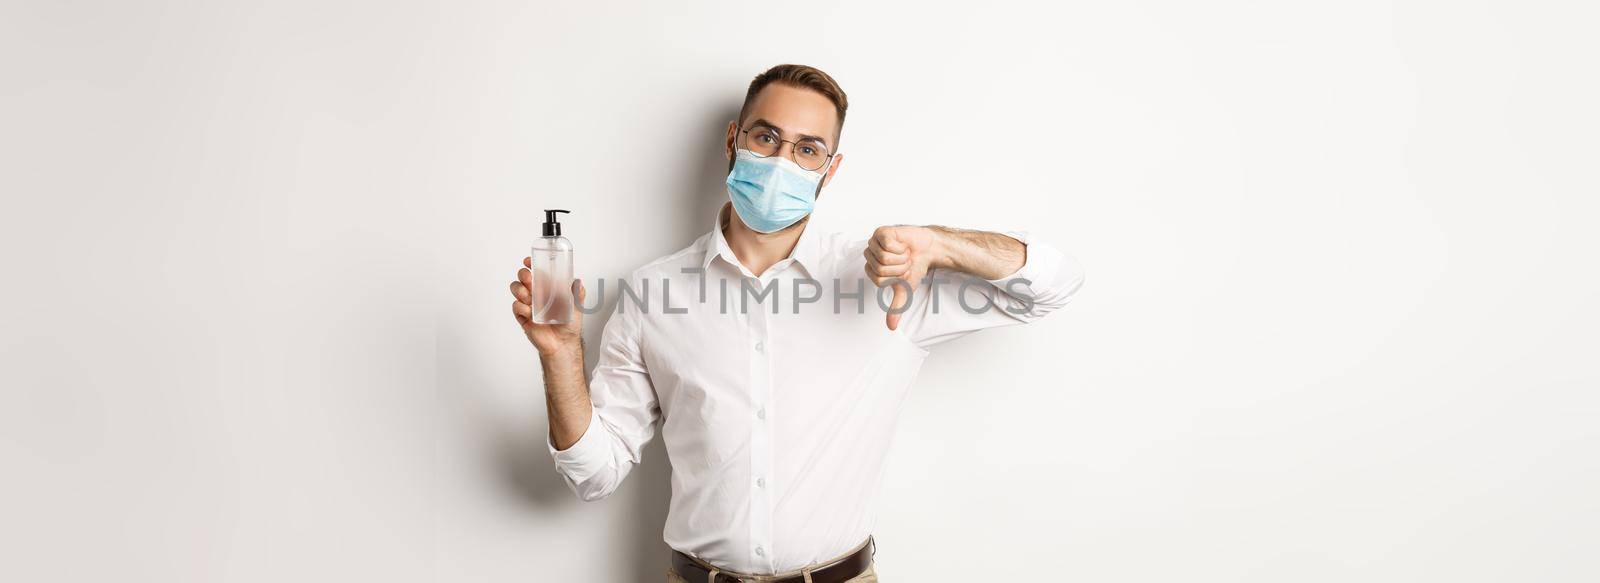 Covid-19, social distancing and quarantine concept. Office worker in medical mask displeased, showing hand sanitizer and thumb down, standing over white background.